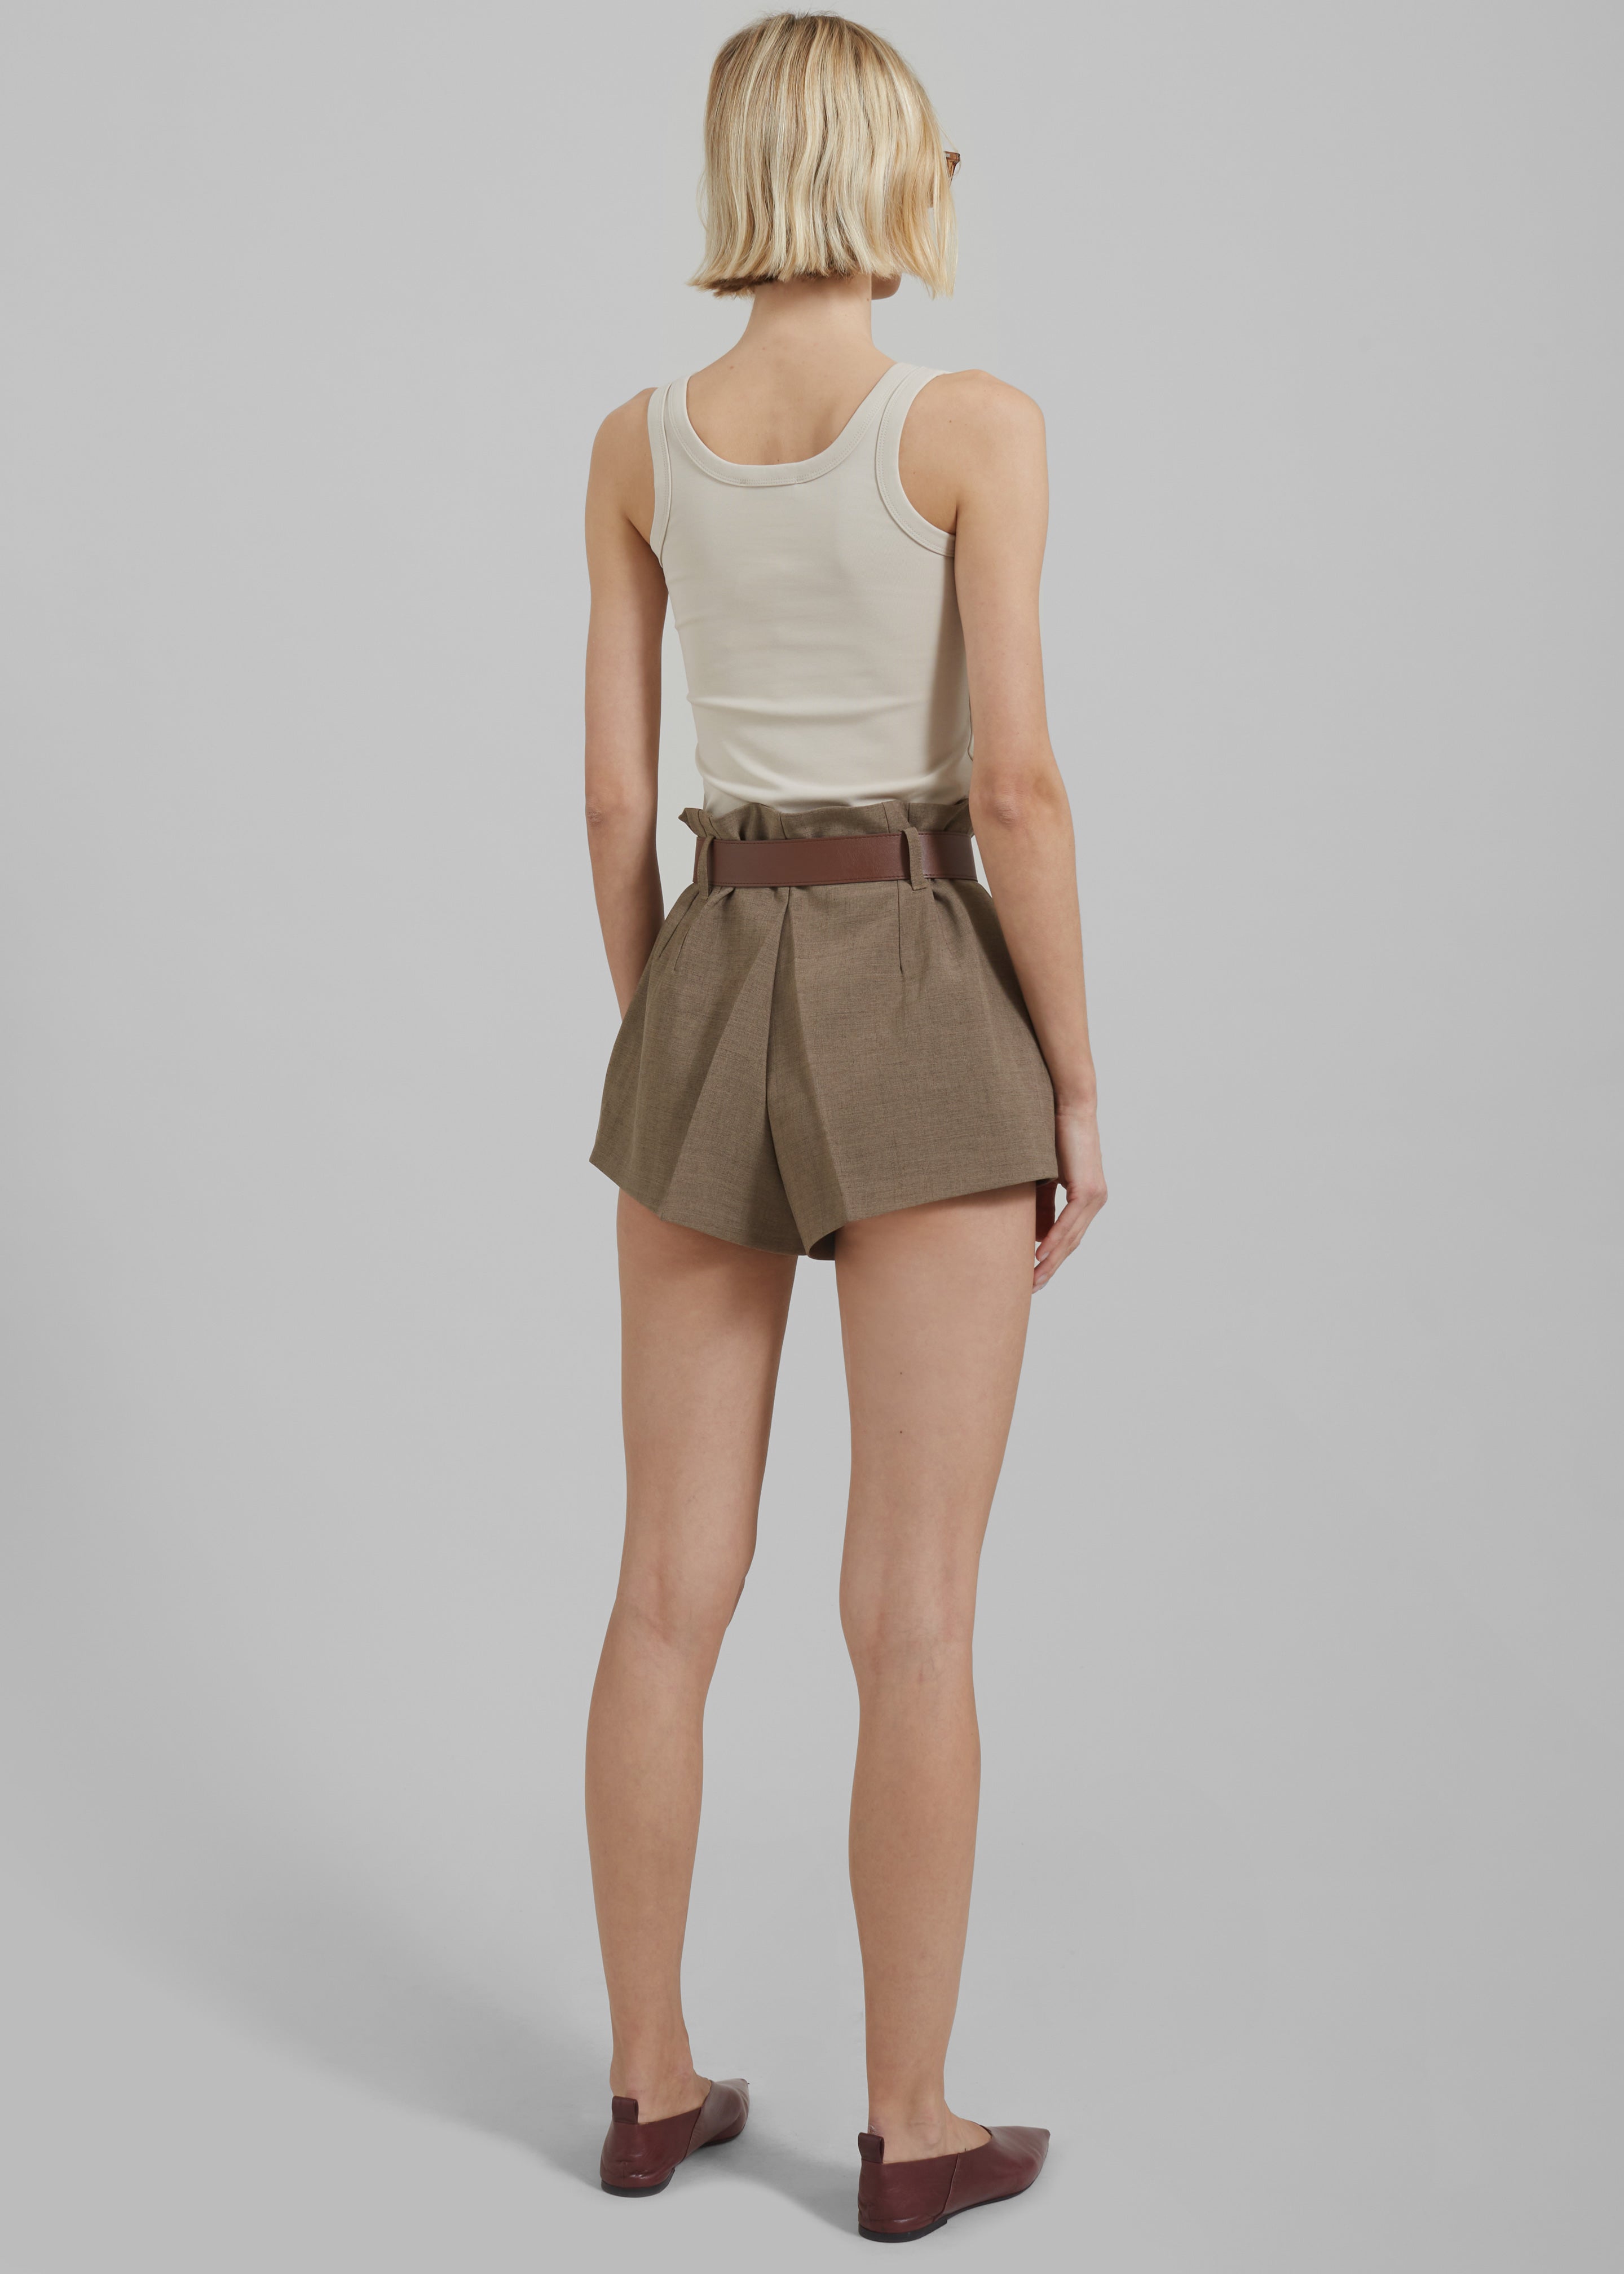 Chappell Belted Shorts - Brown - 12